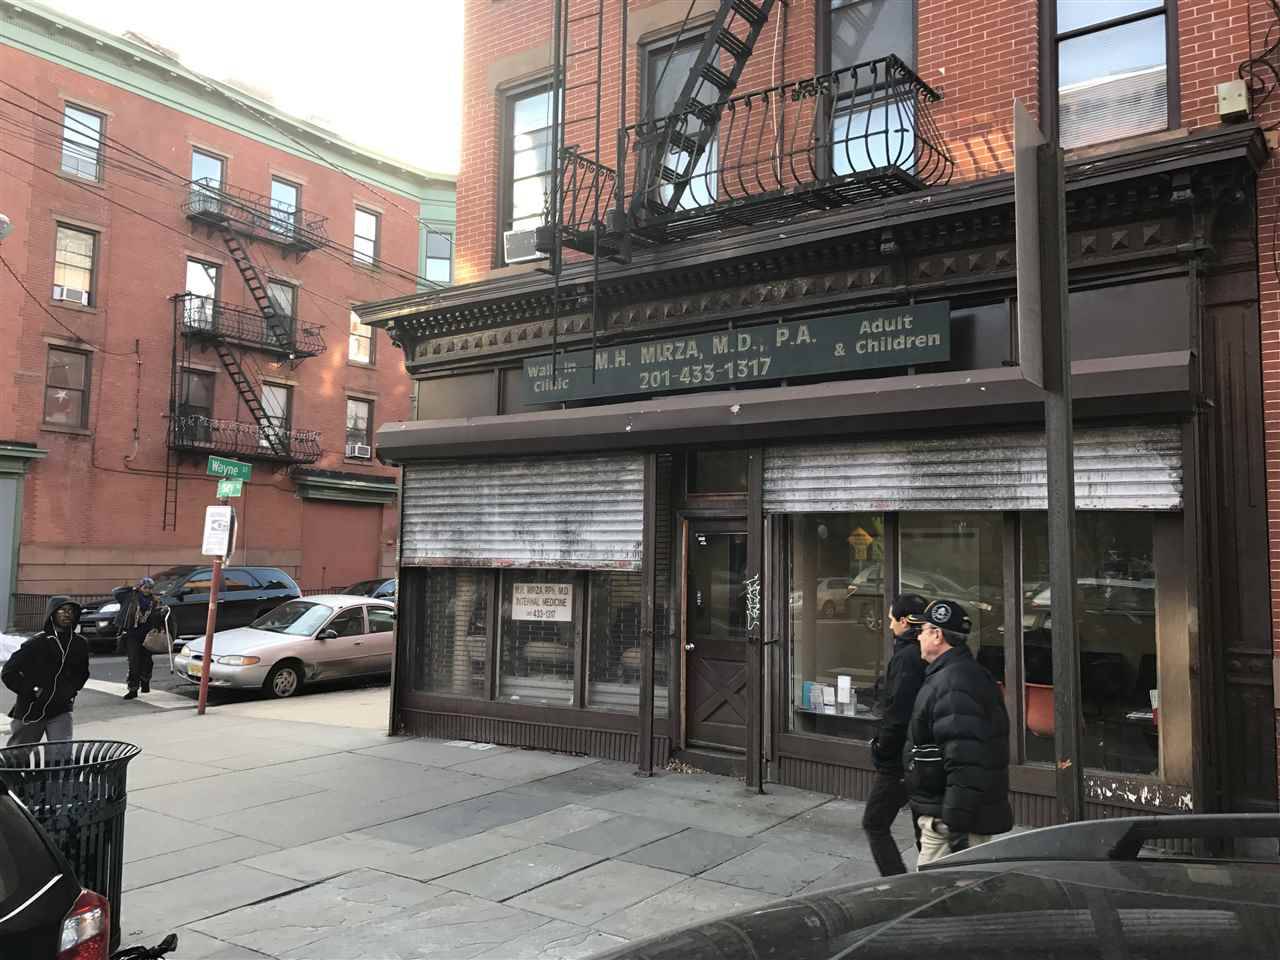 Rare opportunity to lease a commercial store front in downtown Jersey City